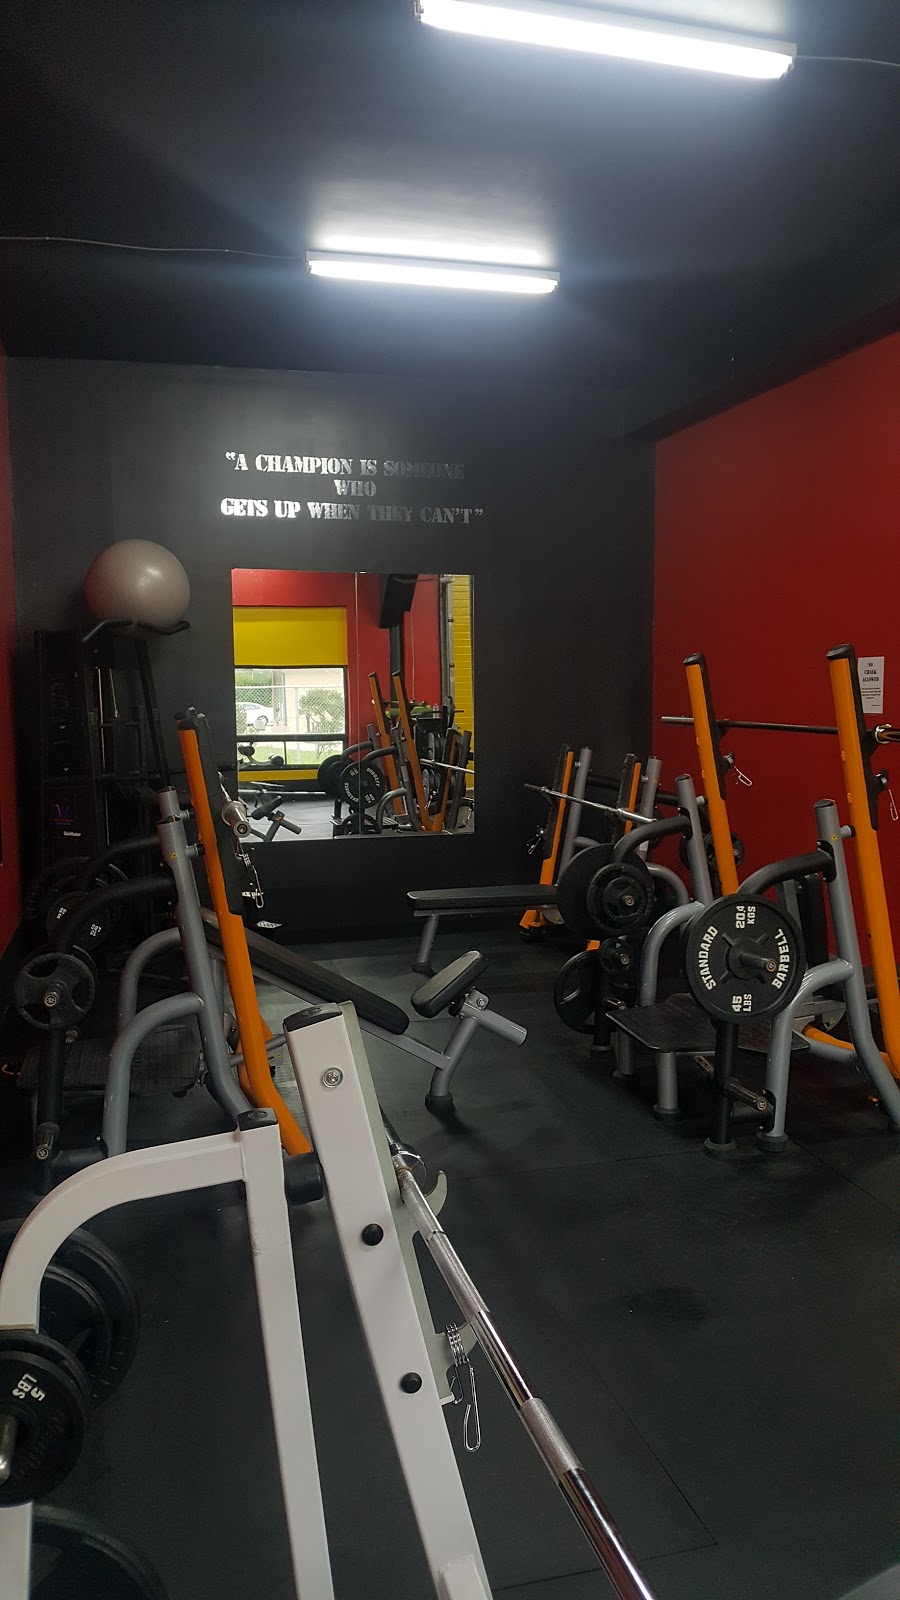 Iron Body Fitness | 42 Union St, Smiths Falls, ON K7A 5C4, Canada | Phone: (613) 284-2242